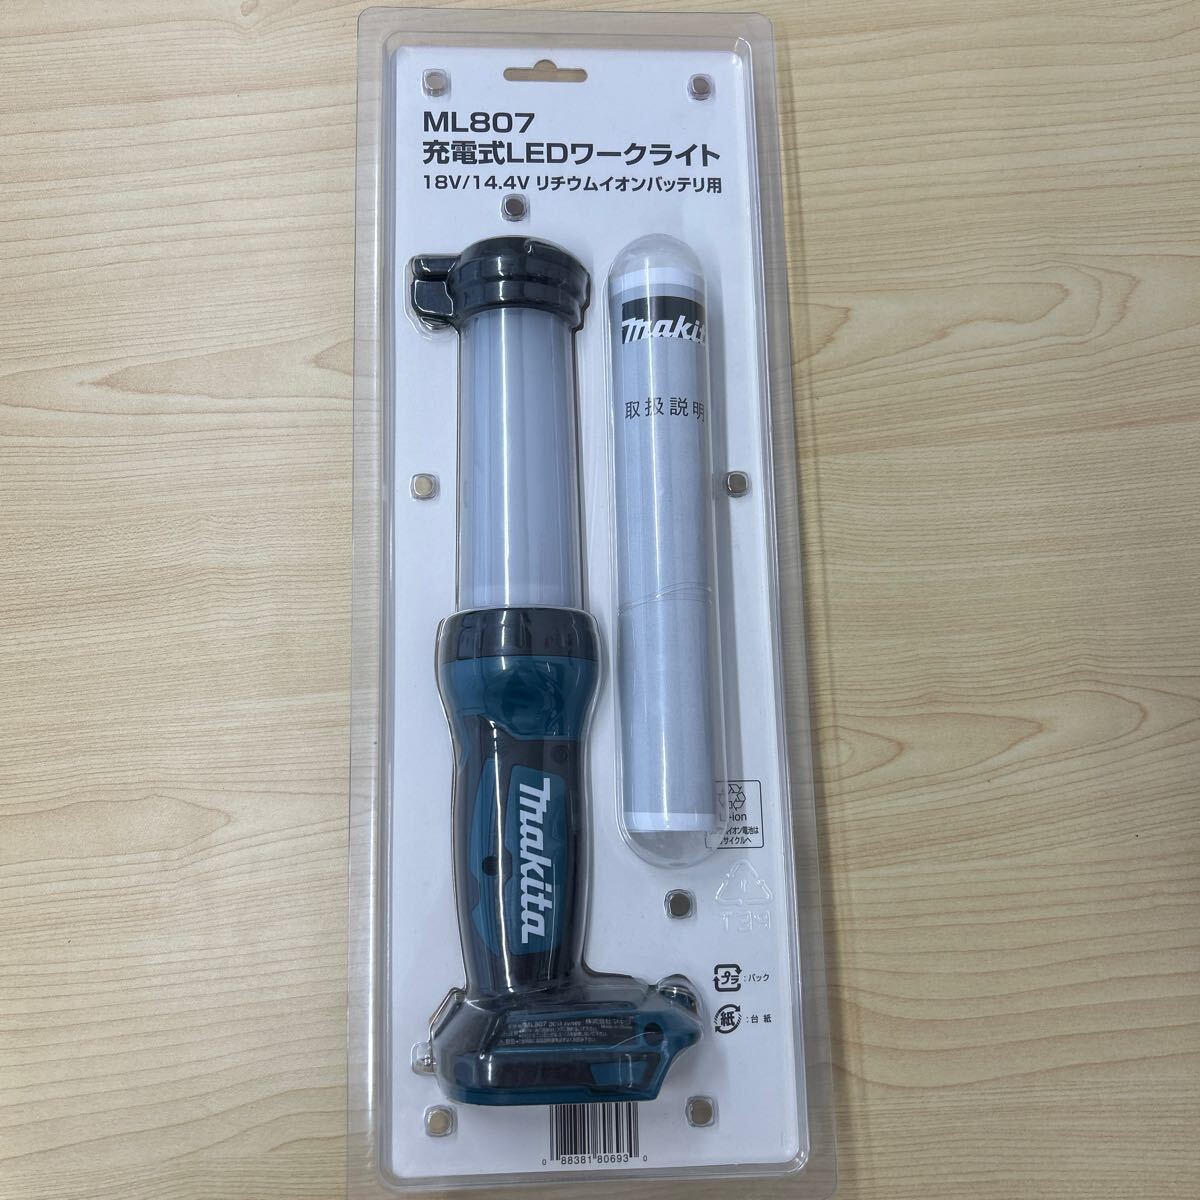  rechargeable LED working light makita ML807